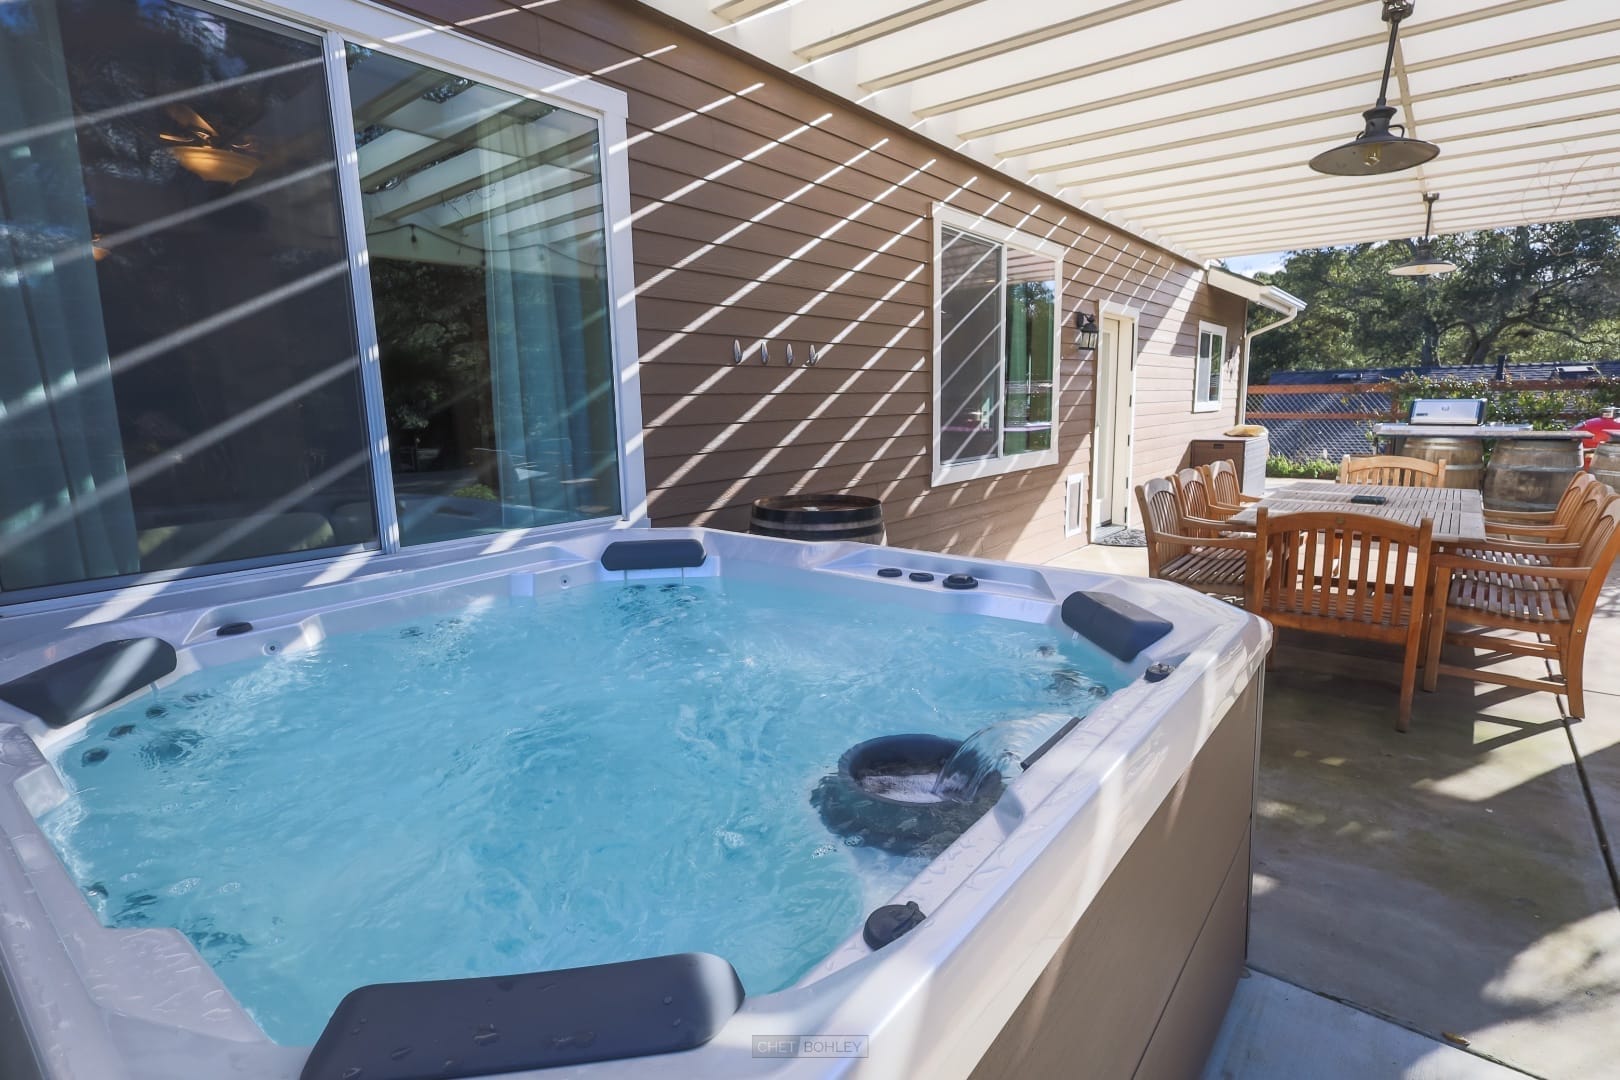 A hot tub on the patio of a home in Paso Robles.